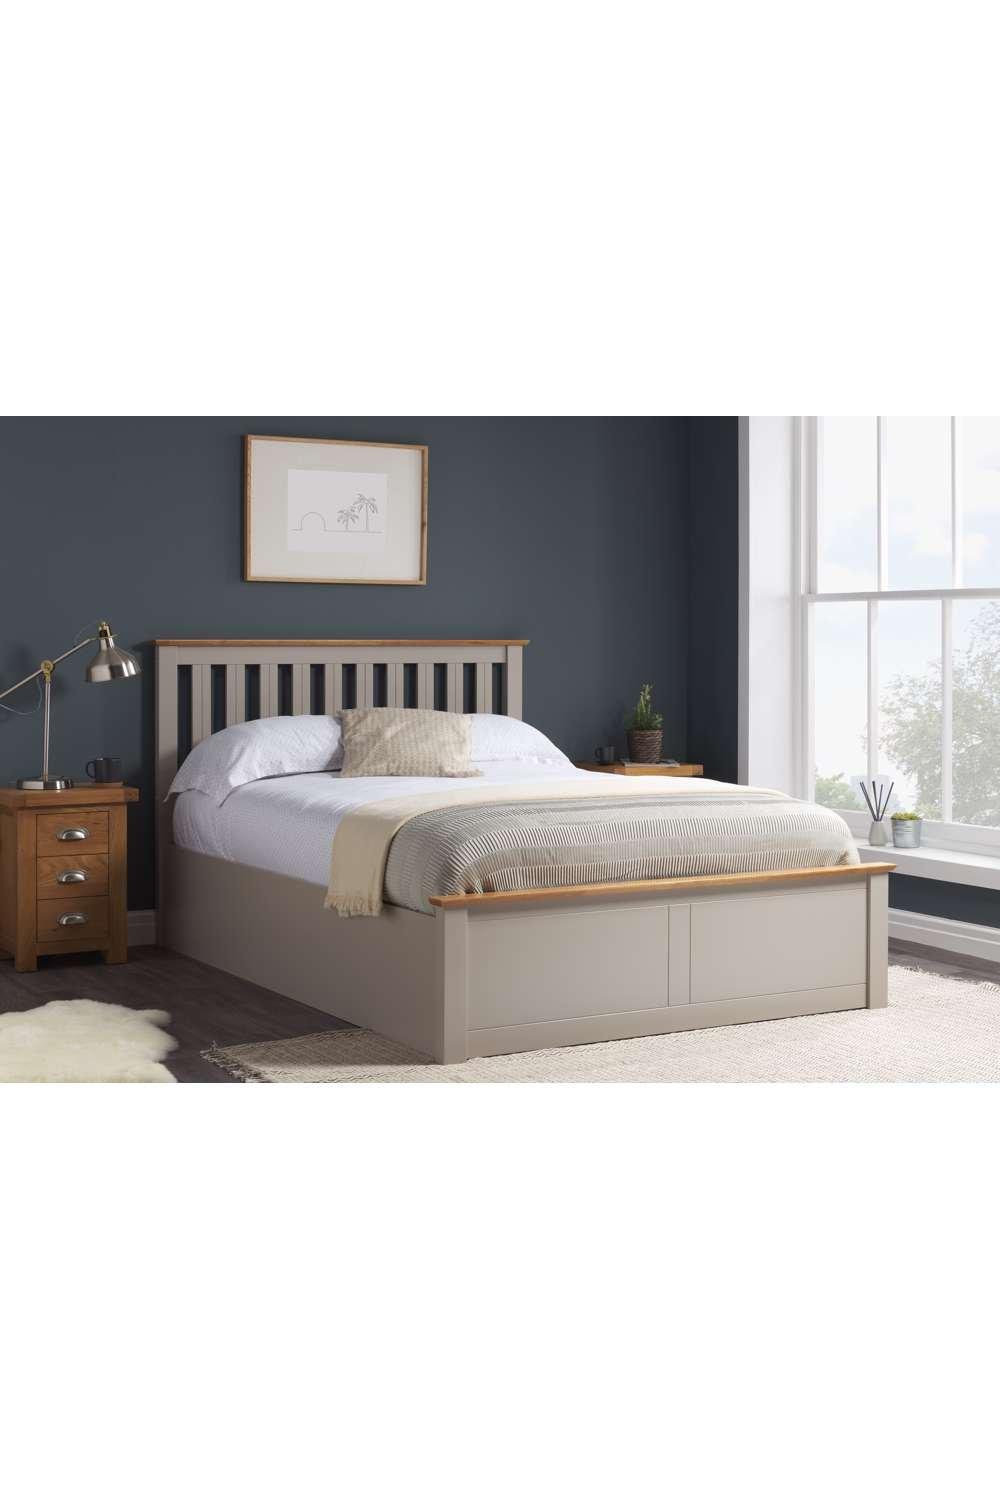 Solid Wood Ottoman Storage Bed Frame Phoenix Gas Lift